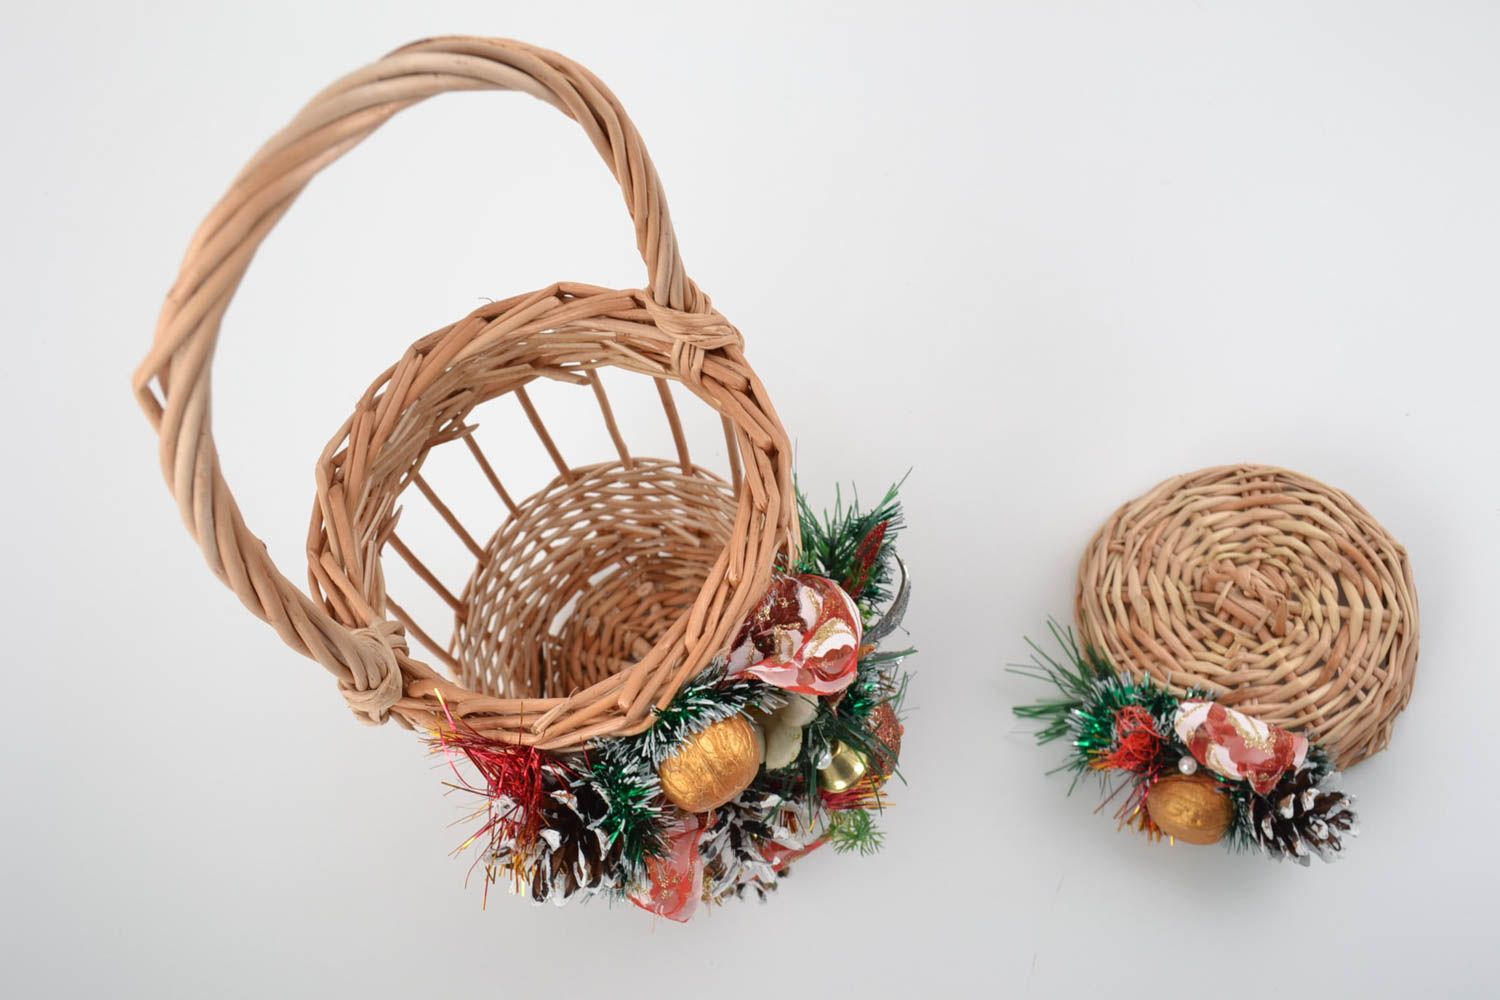 Handmade decorative holiday unusual wicker basket with lid for Easter decor photo 3